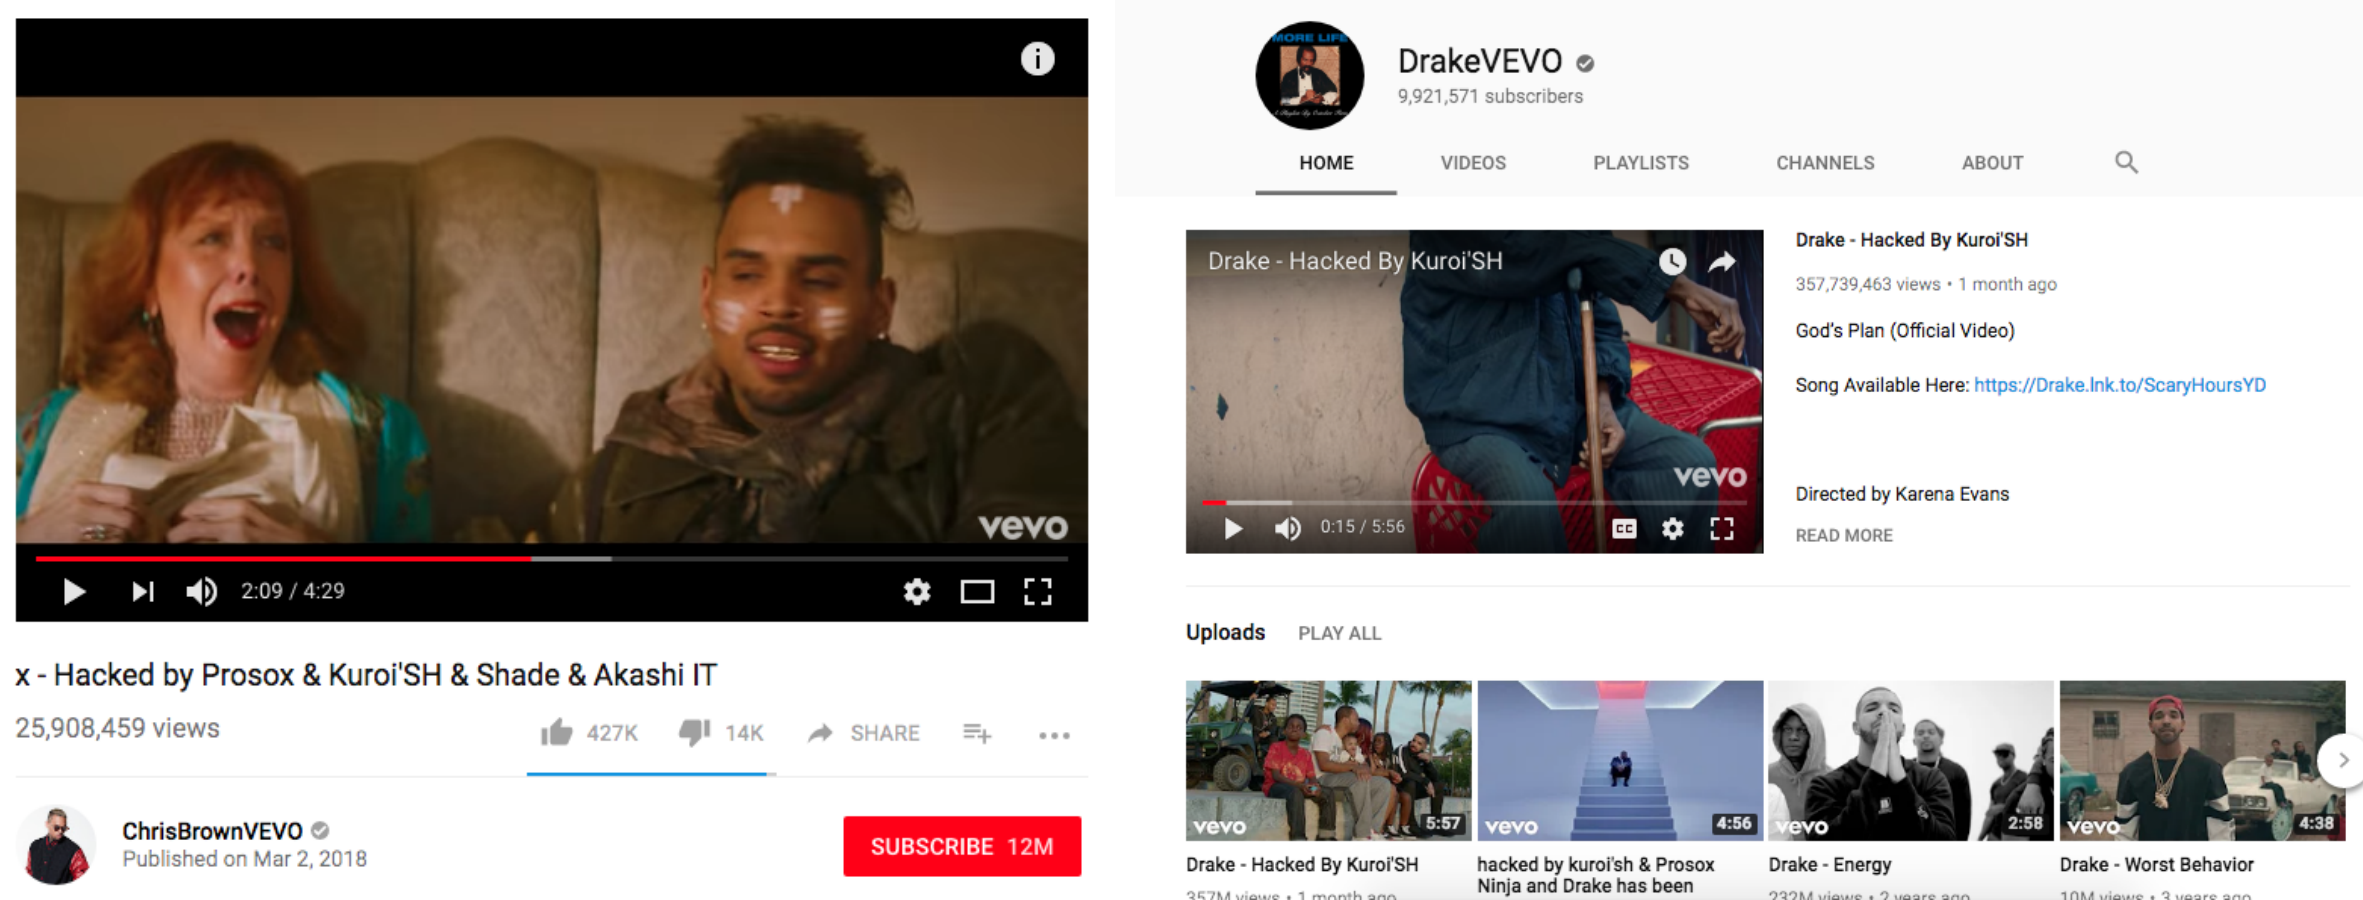 Vevo Youtube Account Hacked Popular Celebs Affected Despacito